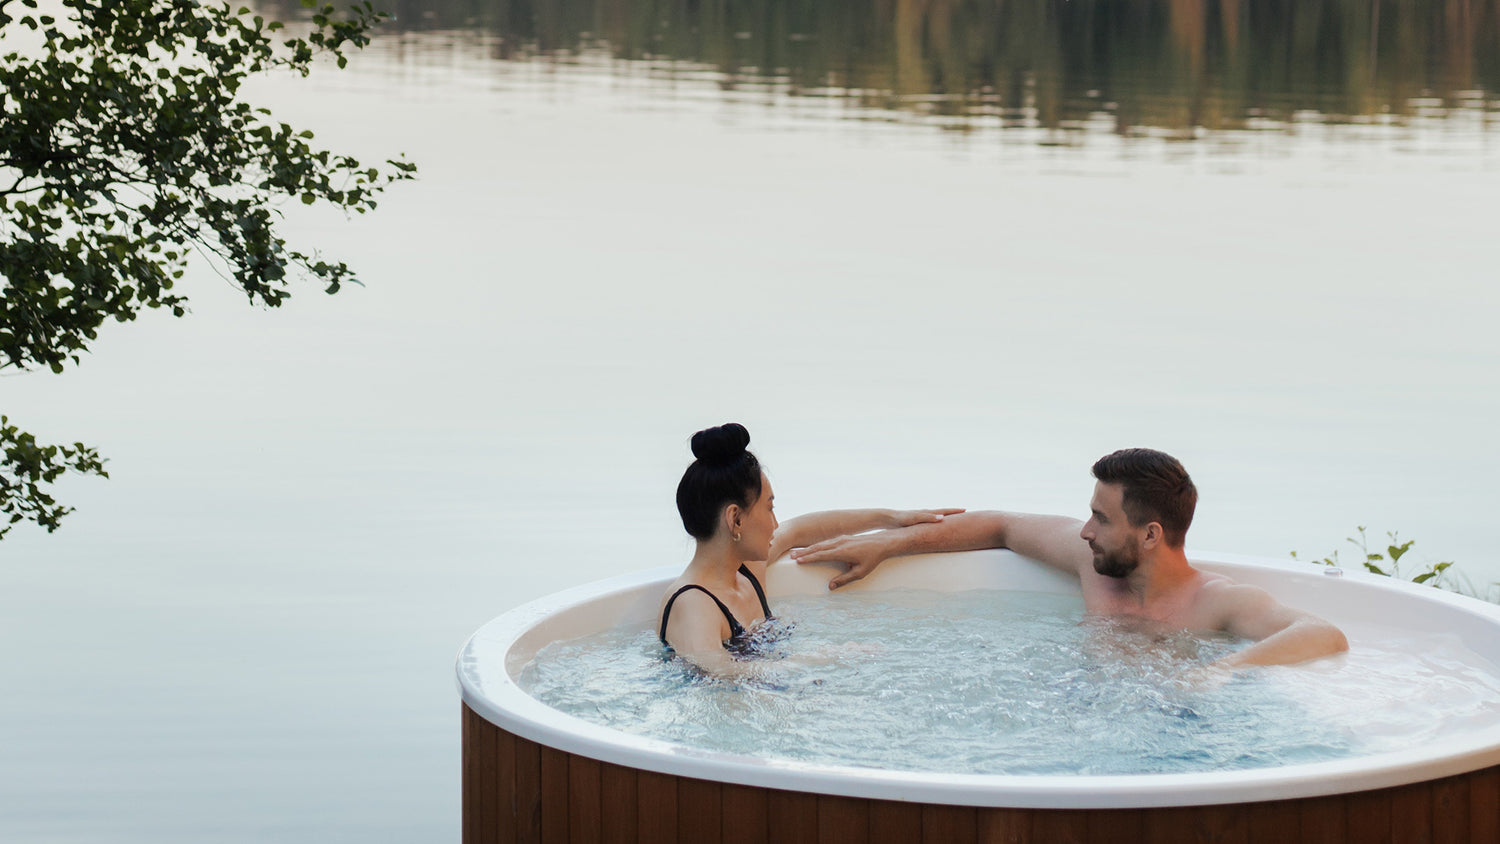 Round Hot Tub in the foreground, in front of a lake. Small tree to left of image. Couple relaxing and talking in hot tub.